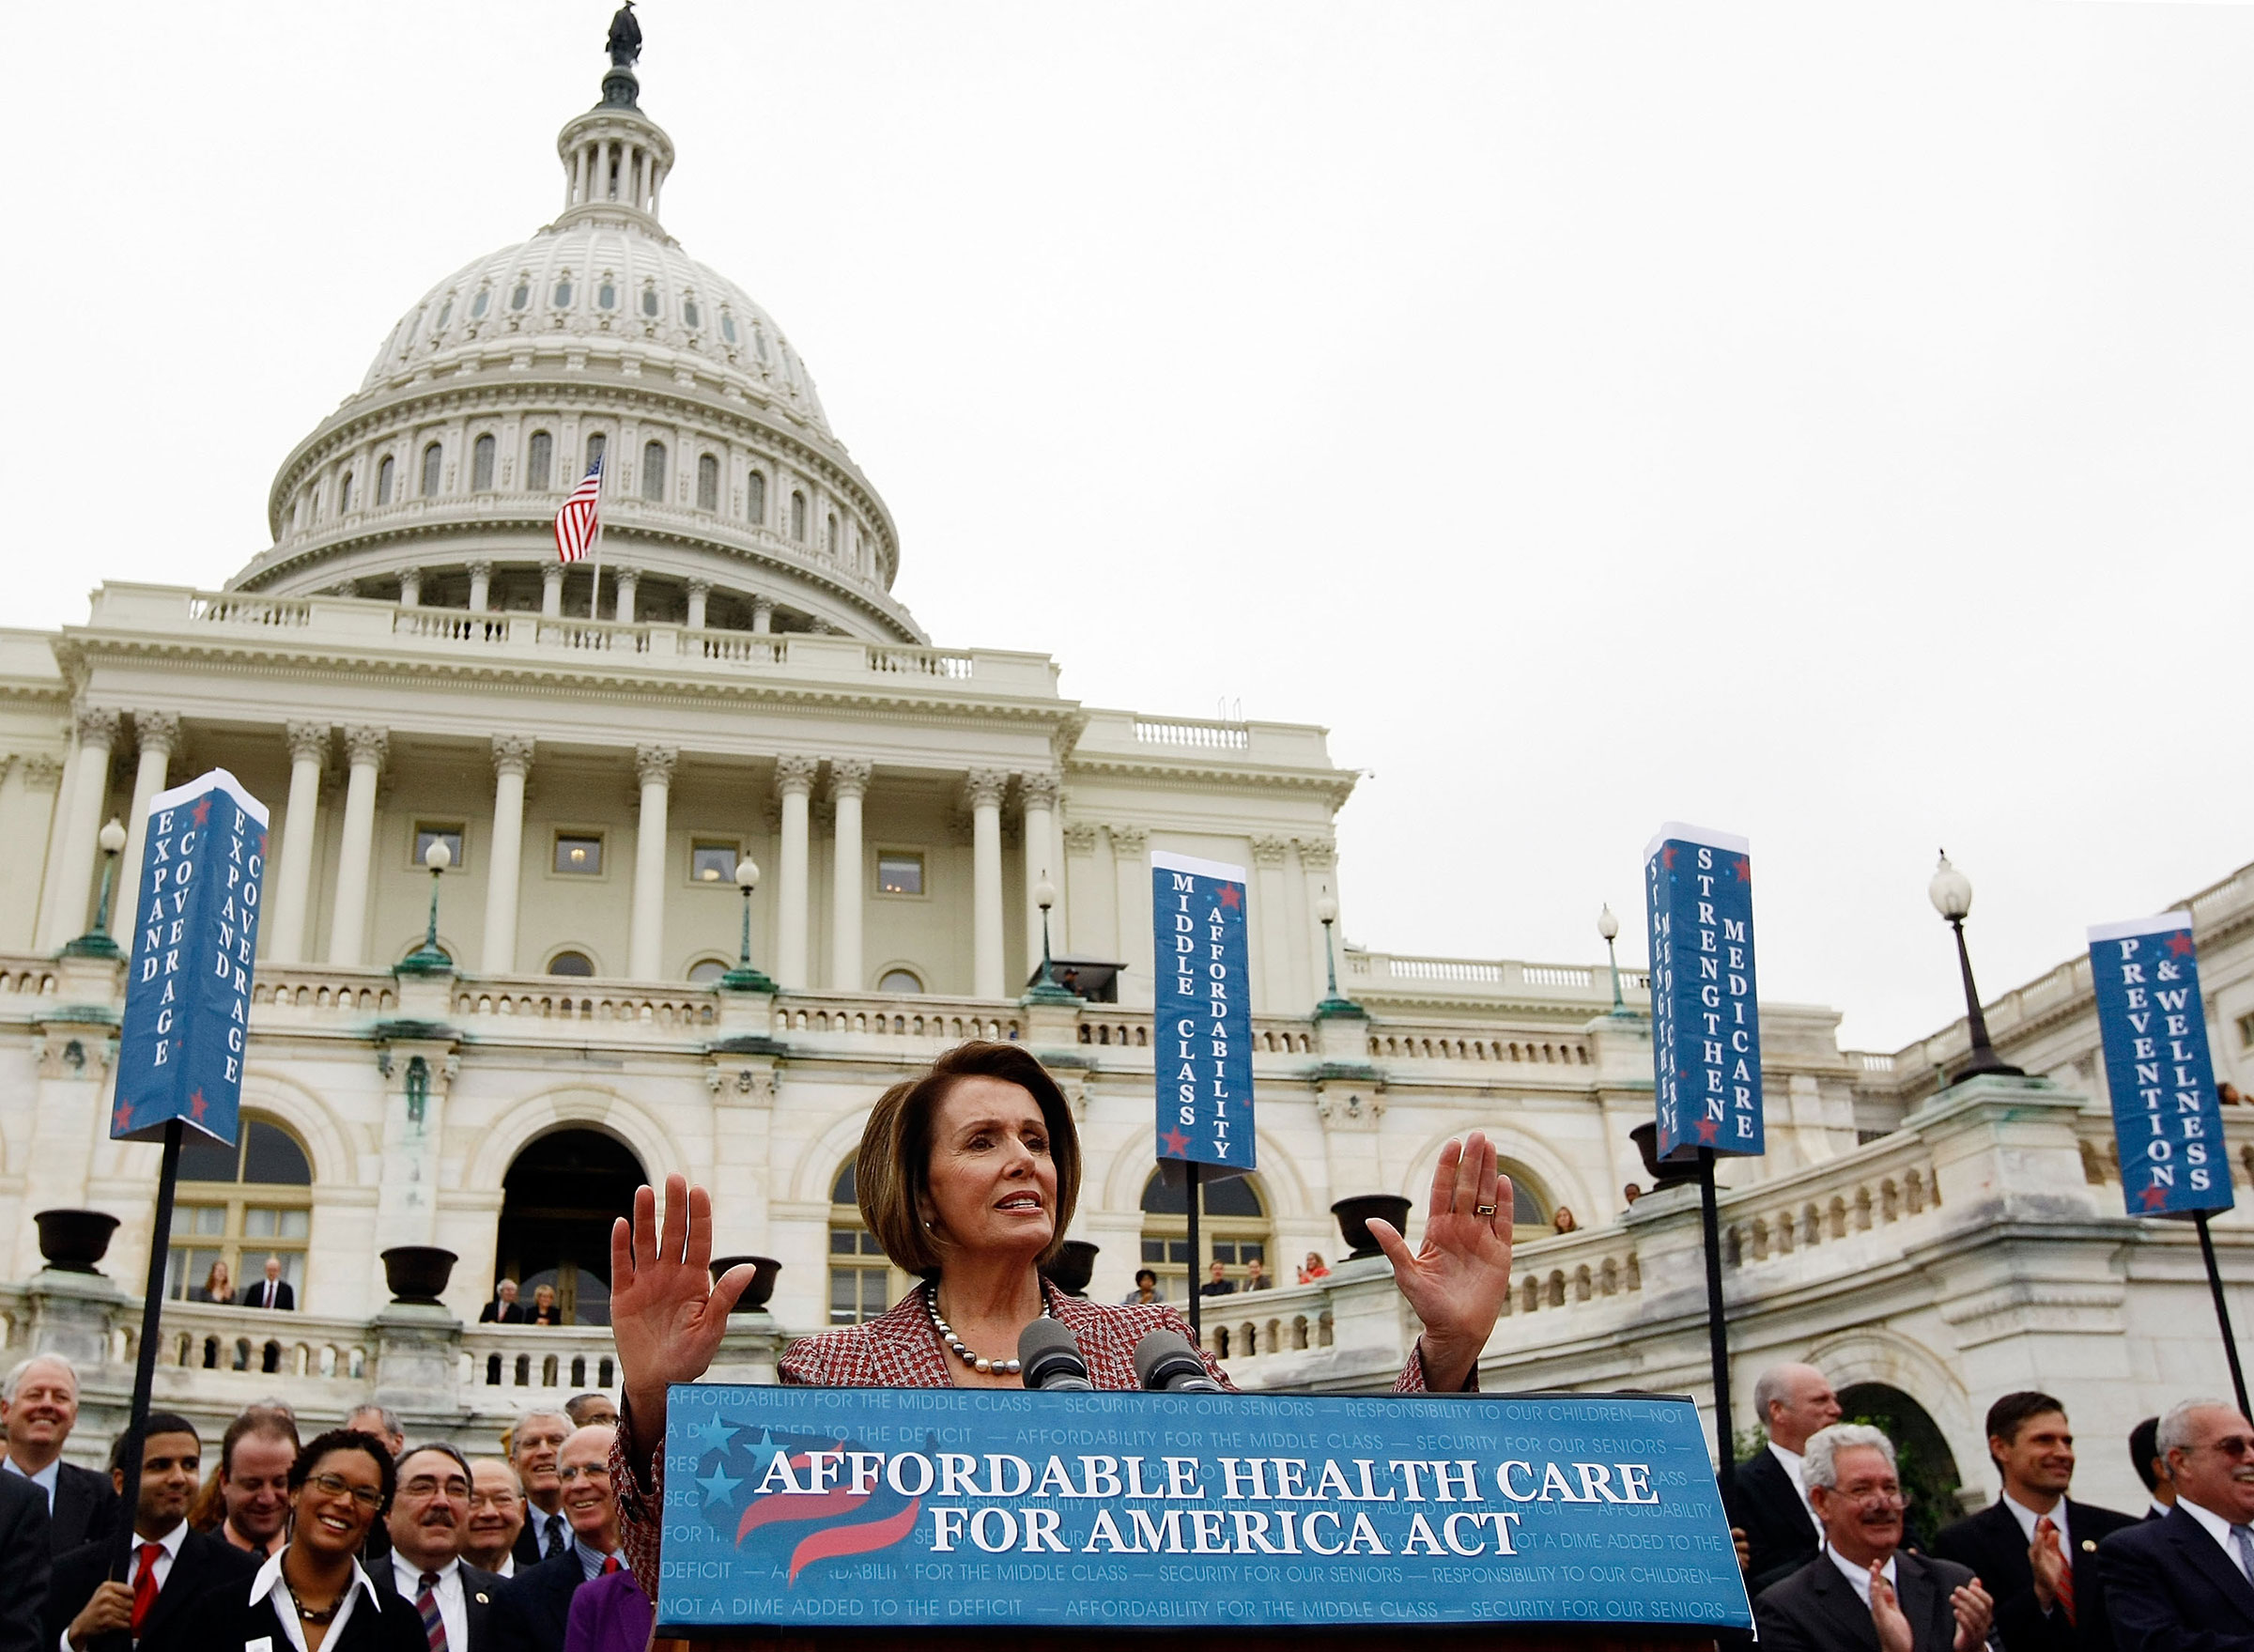 Speaker of the House Rep. Nancy Pelosi speaks during an event at the U.S. Capitol unveiling the House of Representatives' "Affordable Health Care for America Act" on Oct. 29, 2009. (Win McNamee—Getty Images)